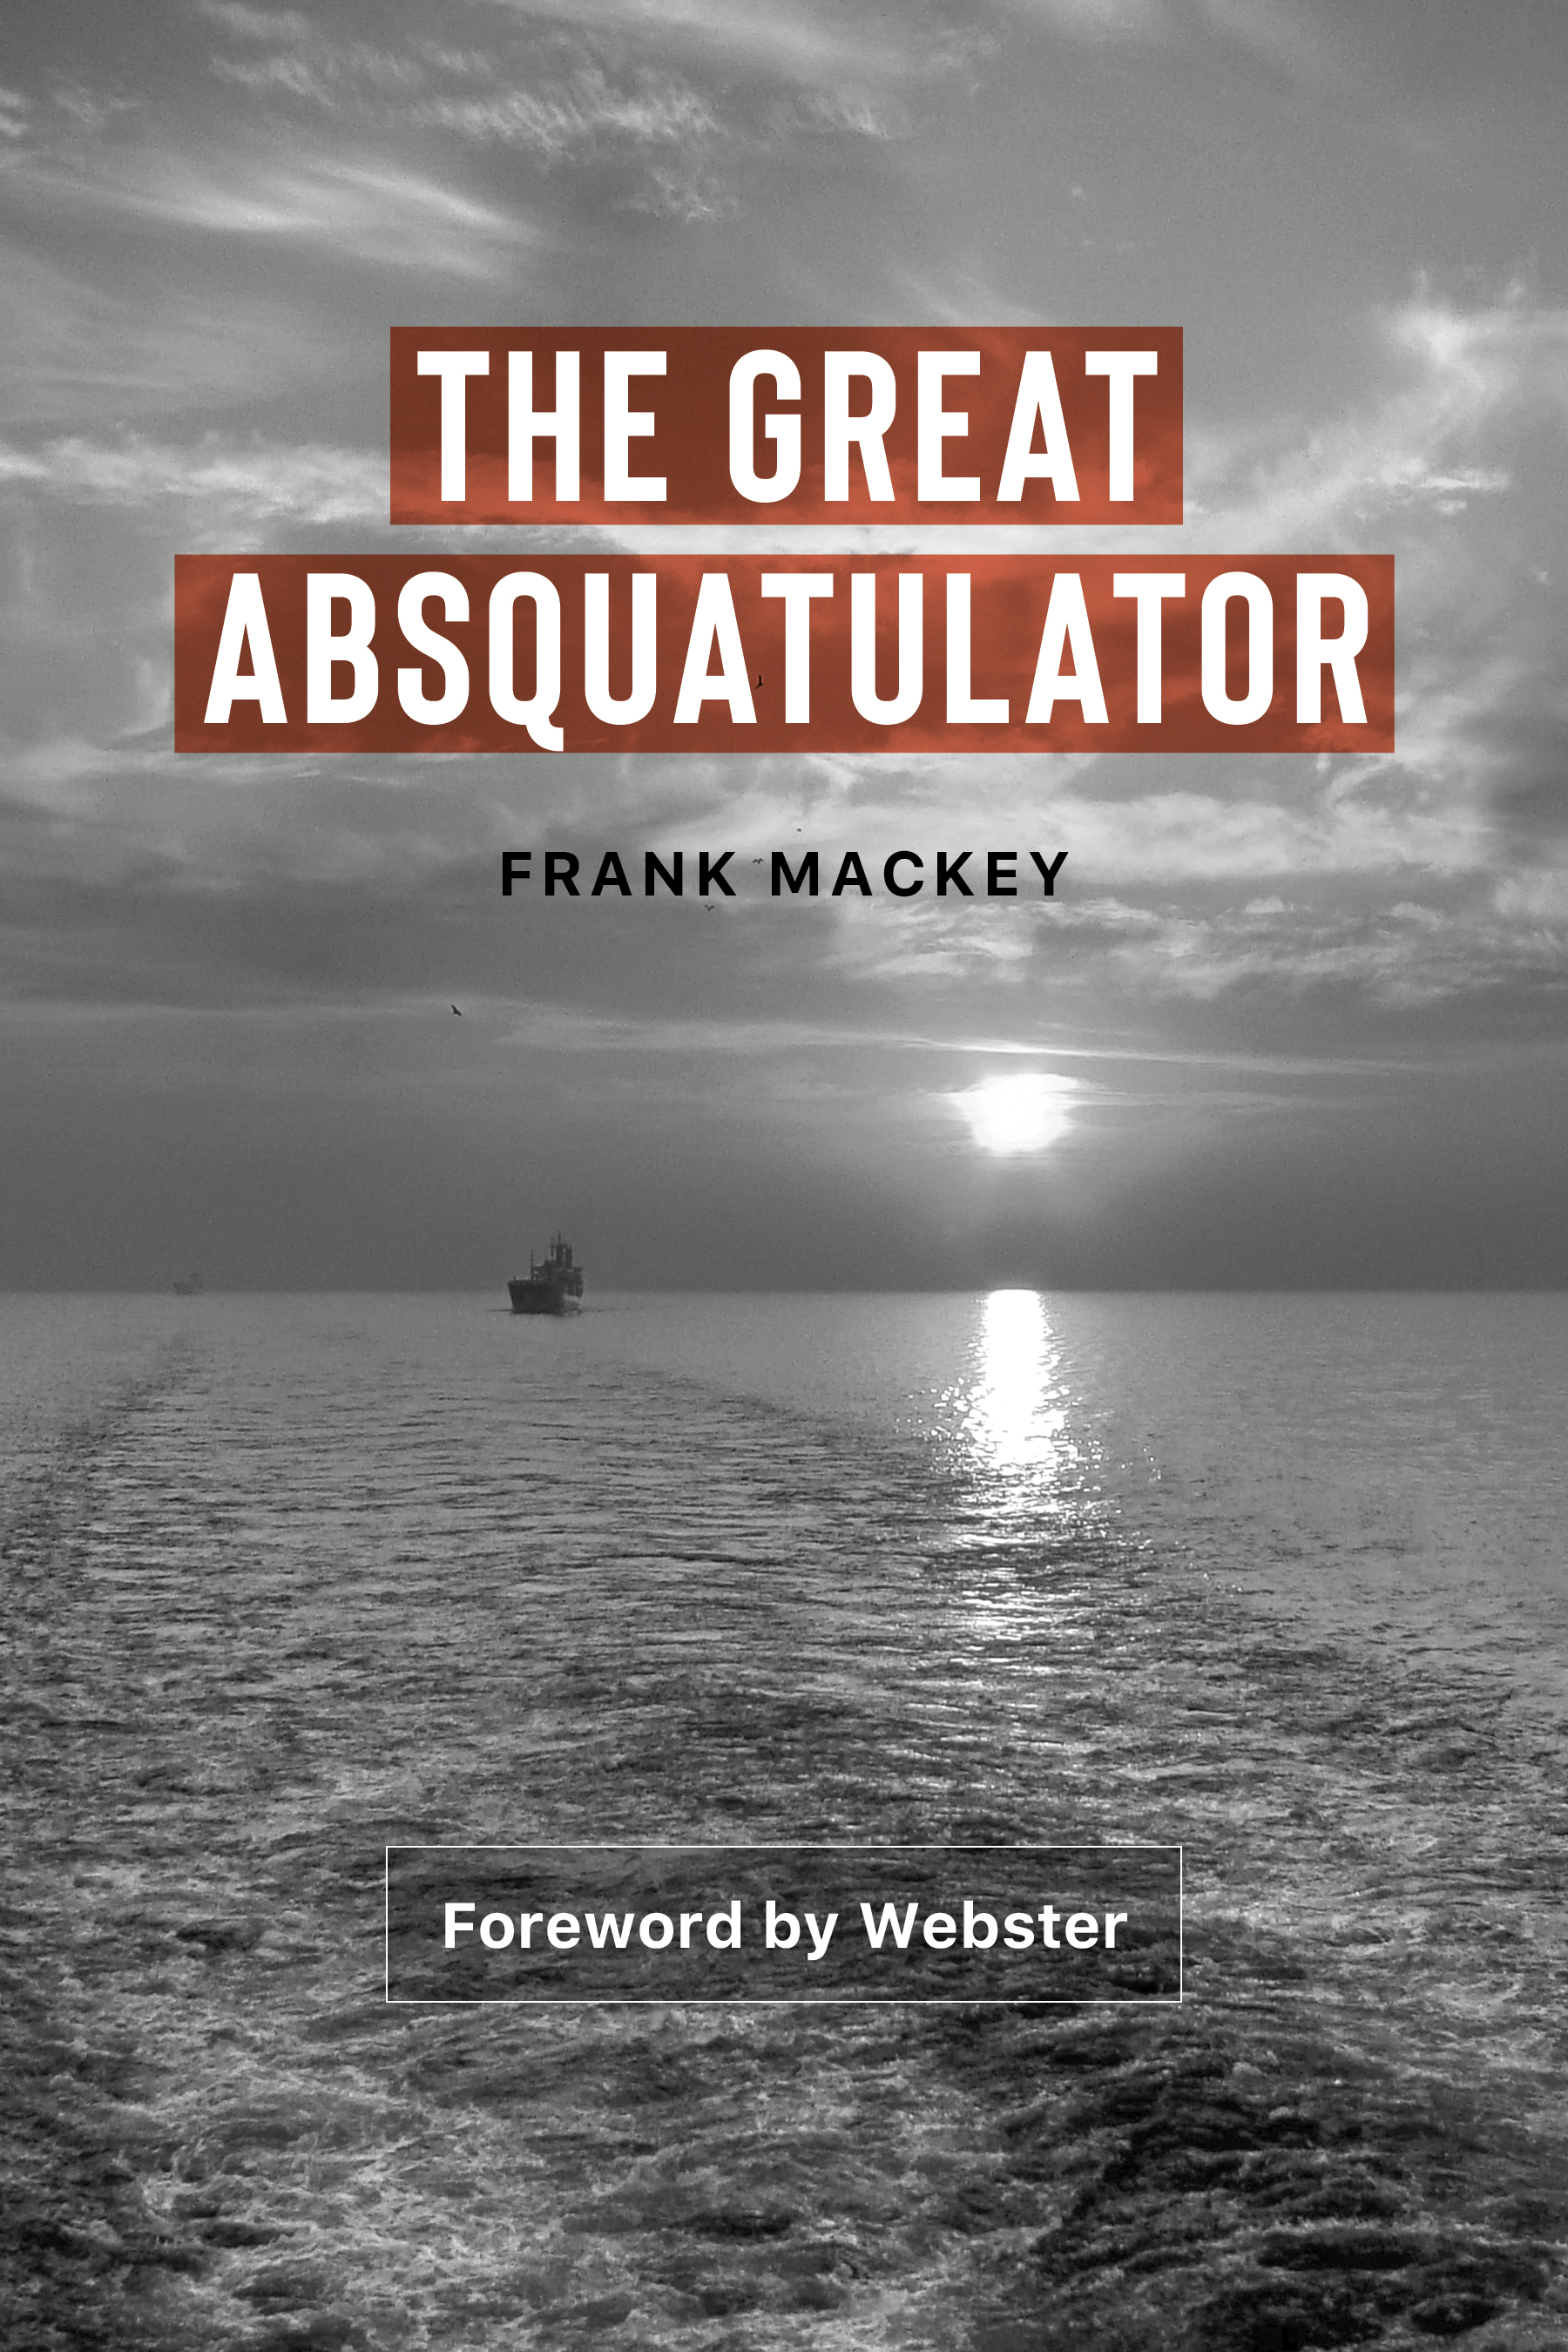 THE GREAT ABSQUATULATOR